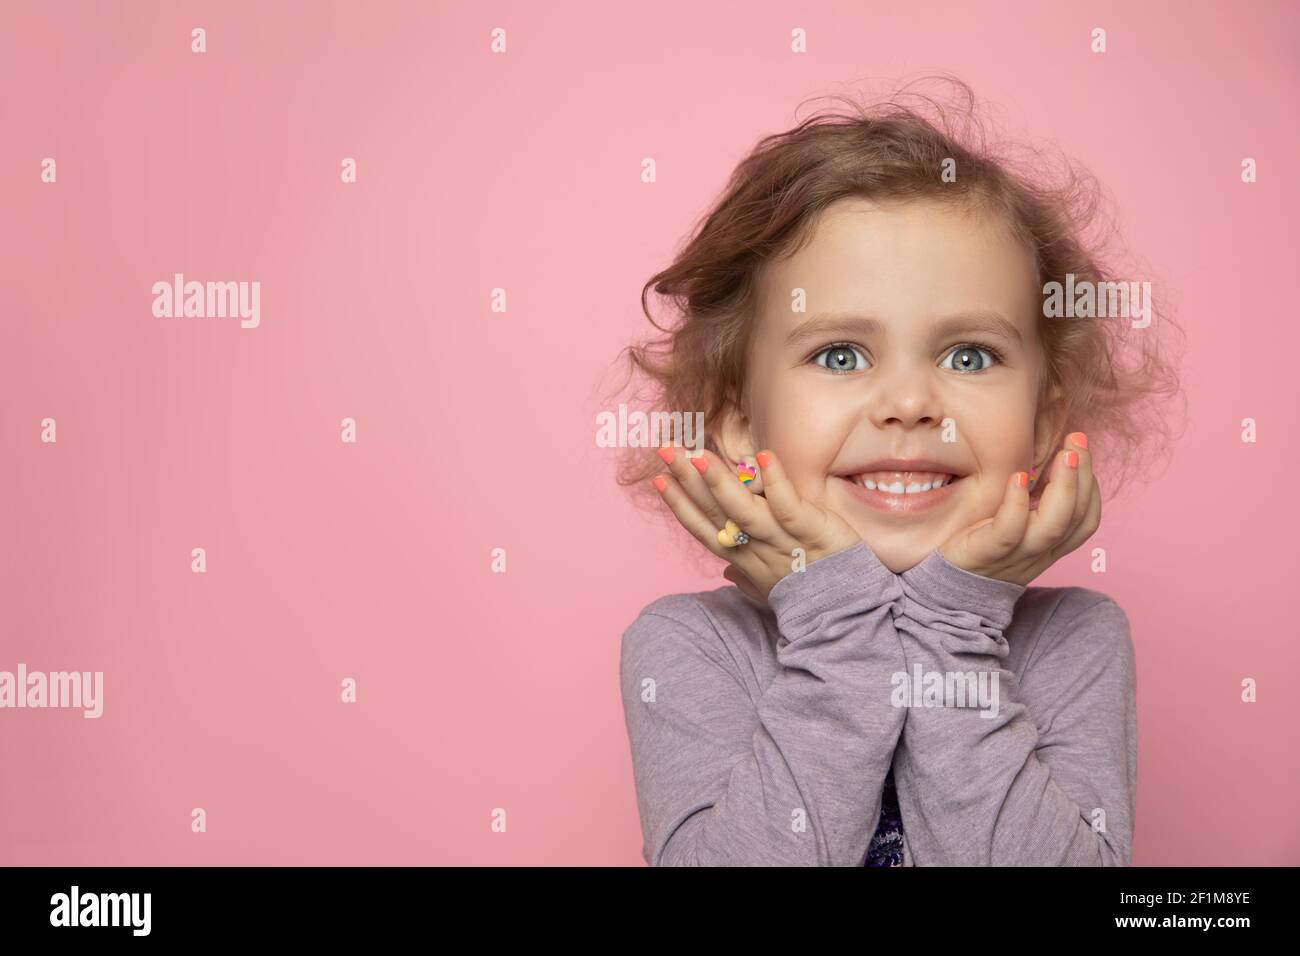 Little girl child blonde with curly girl painted her fingers with nail polish, look into frame in studio and smile. Close-up photo with copy space Stock Photo